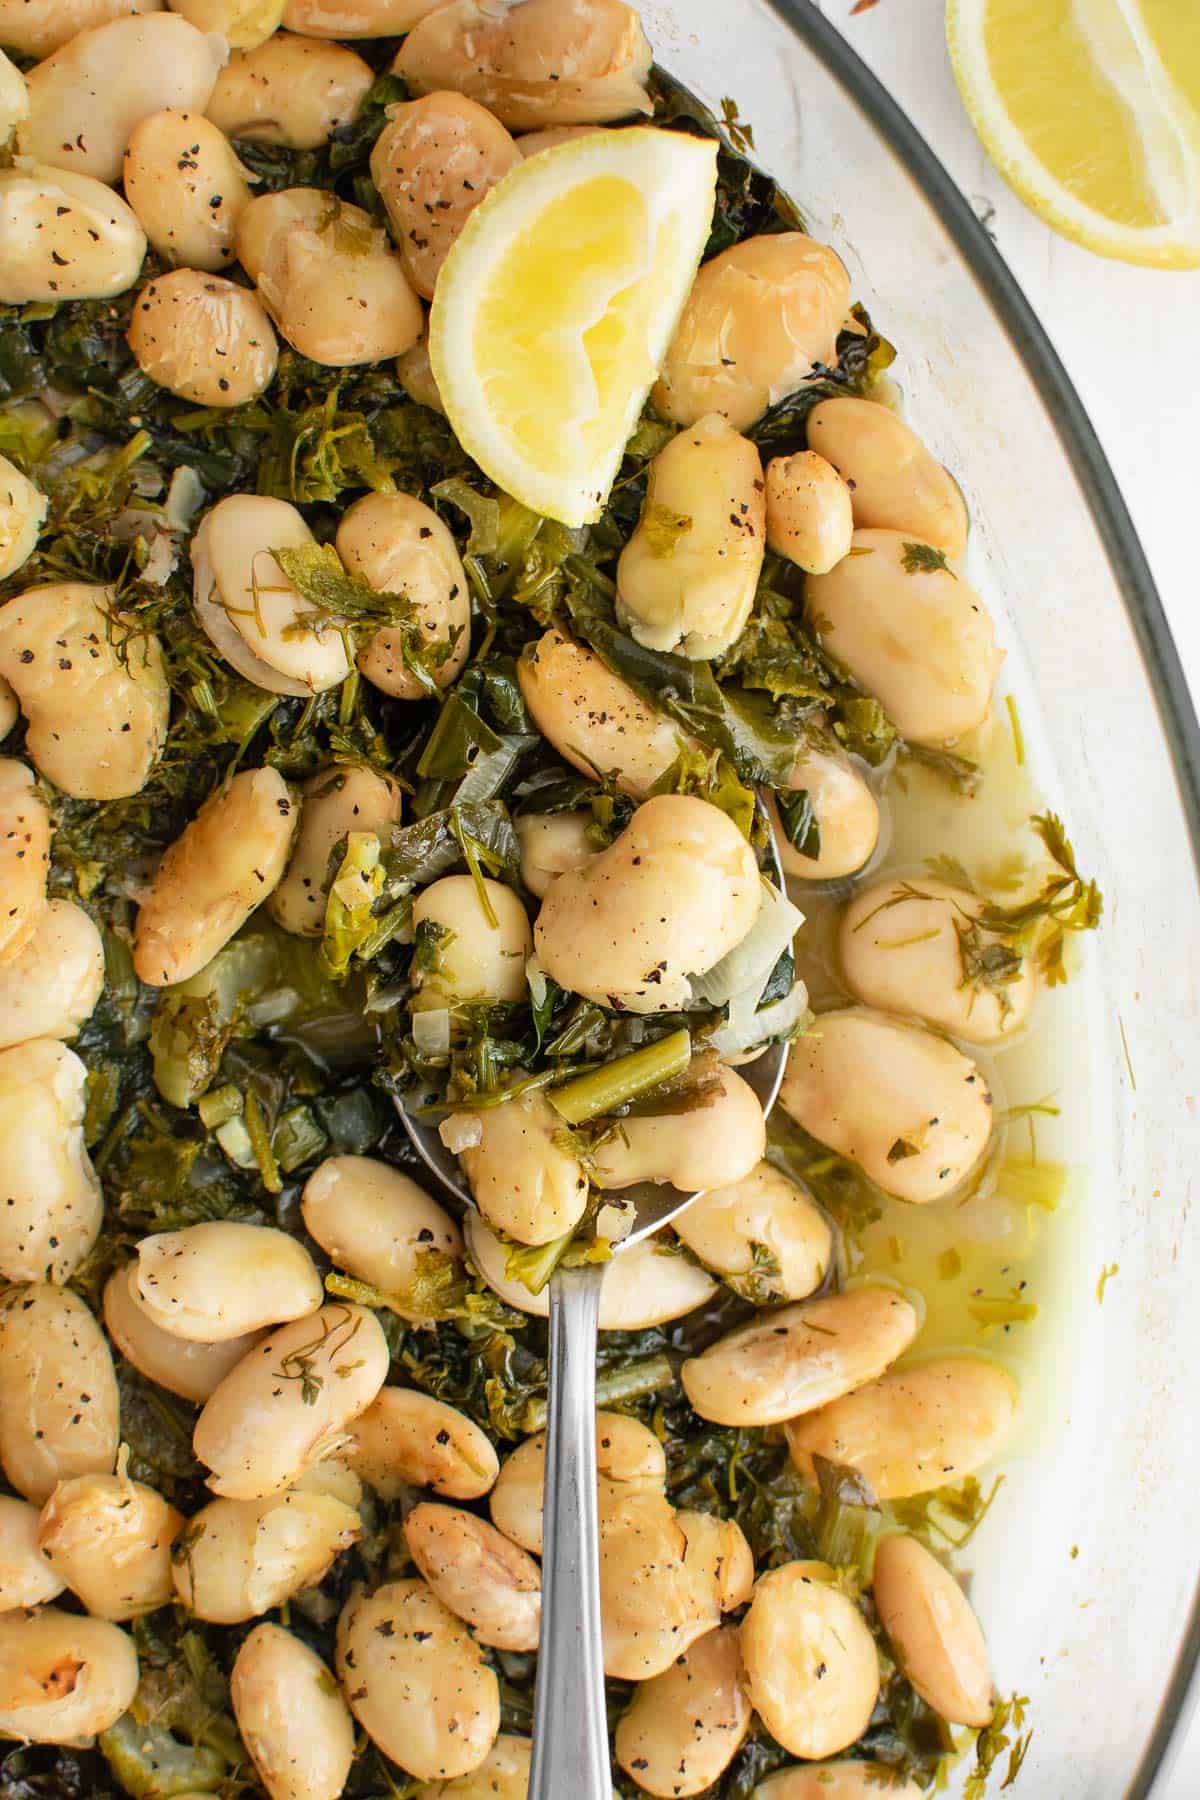 Baked Lima Beans With Greens